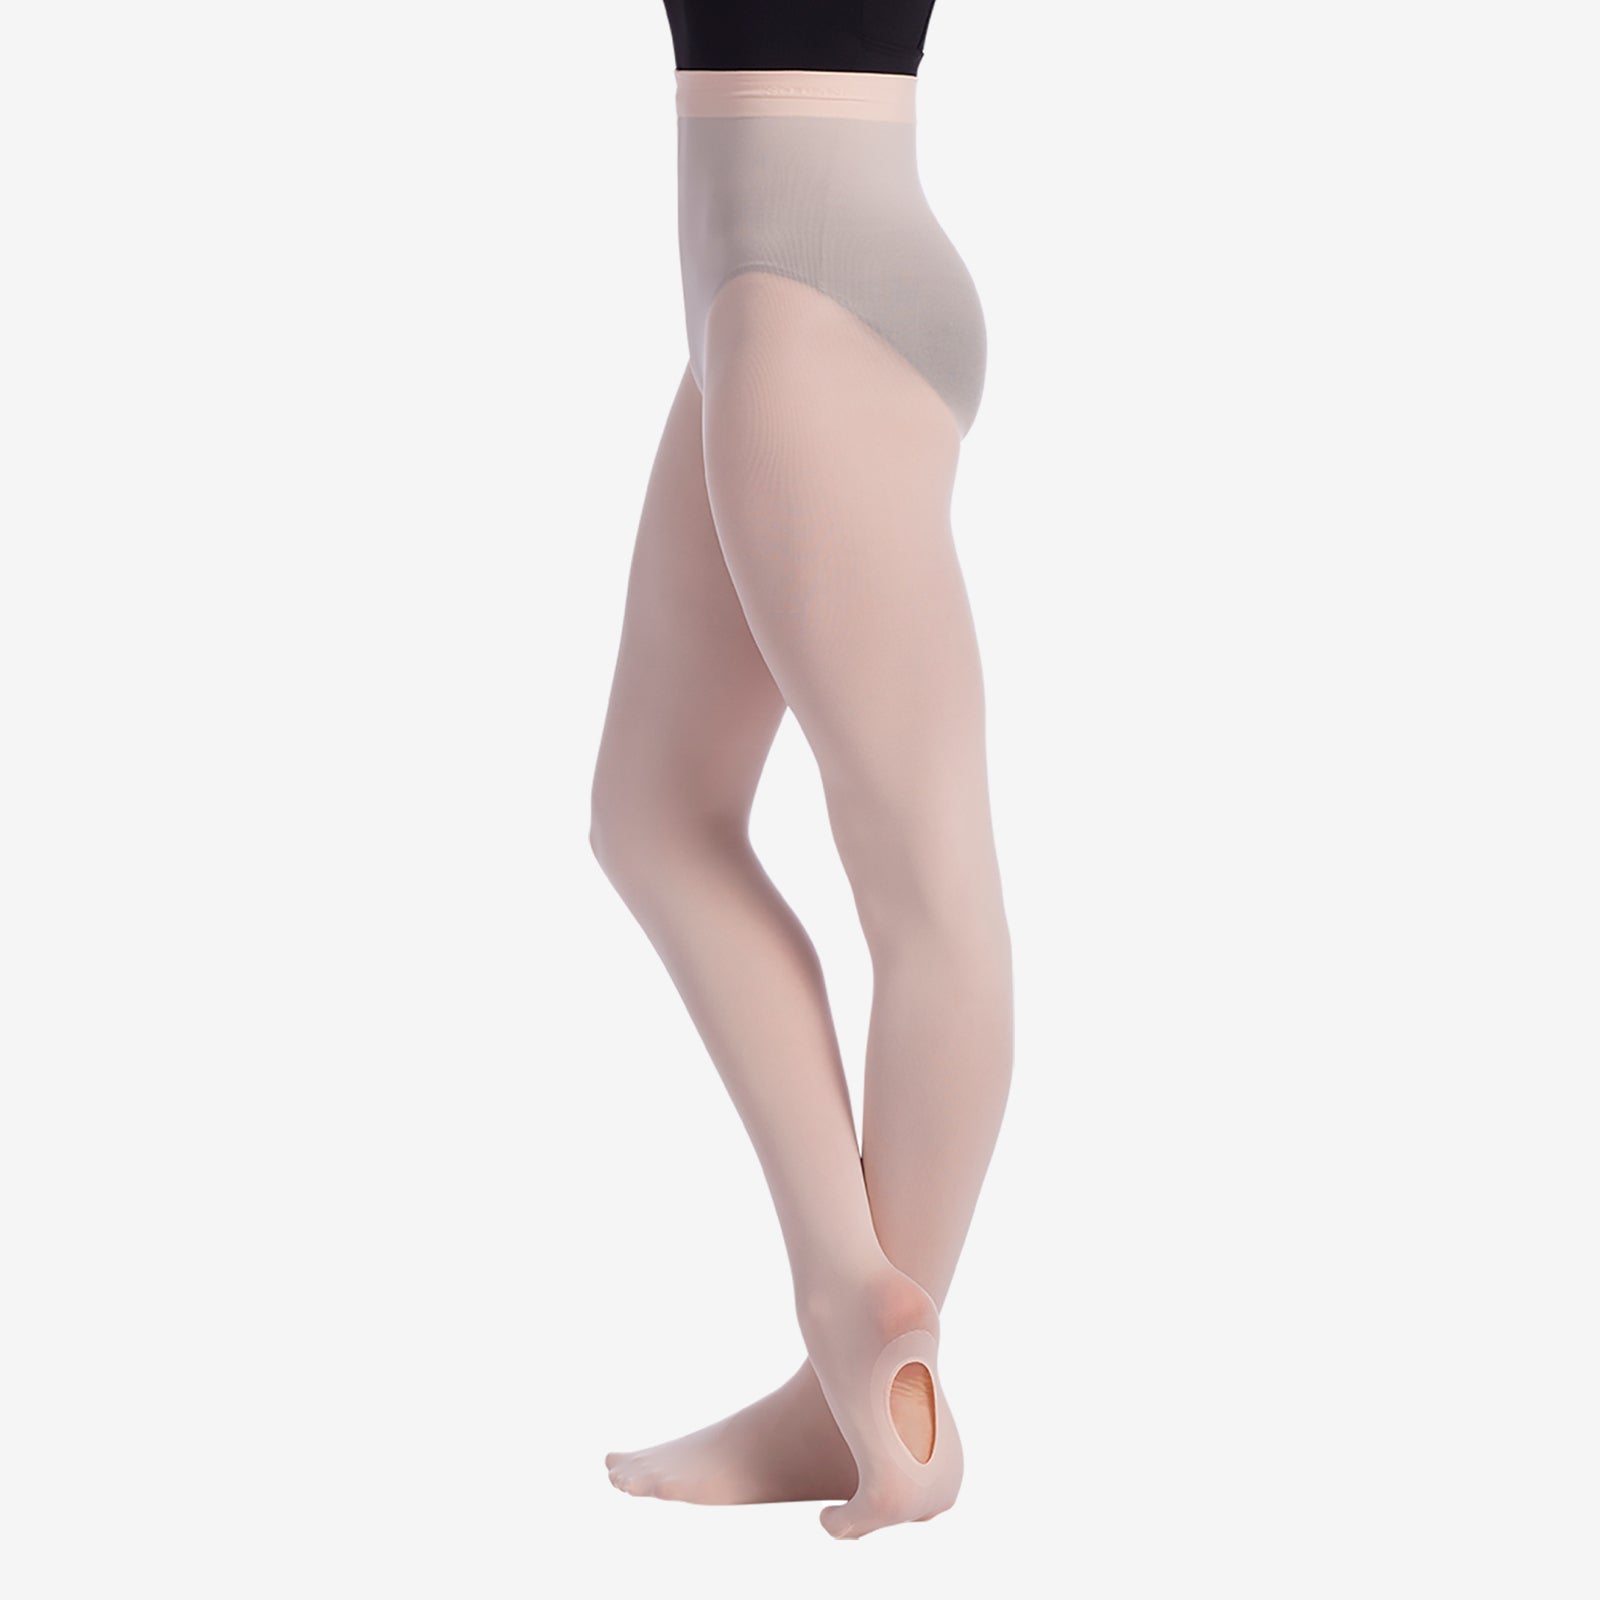 Tights, Intimates, and Competition Essentials - SHIMMY Dancewear